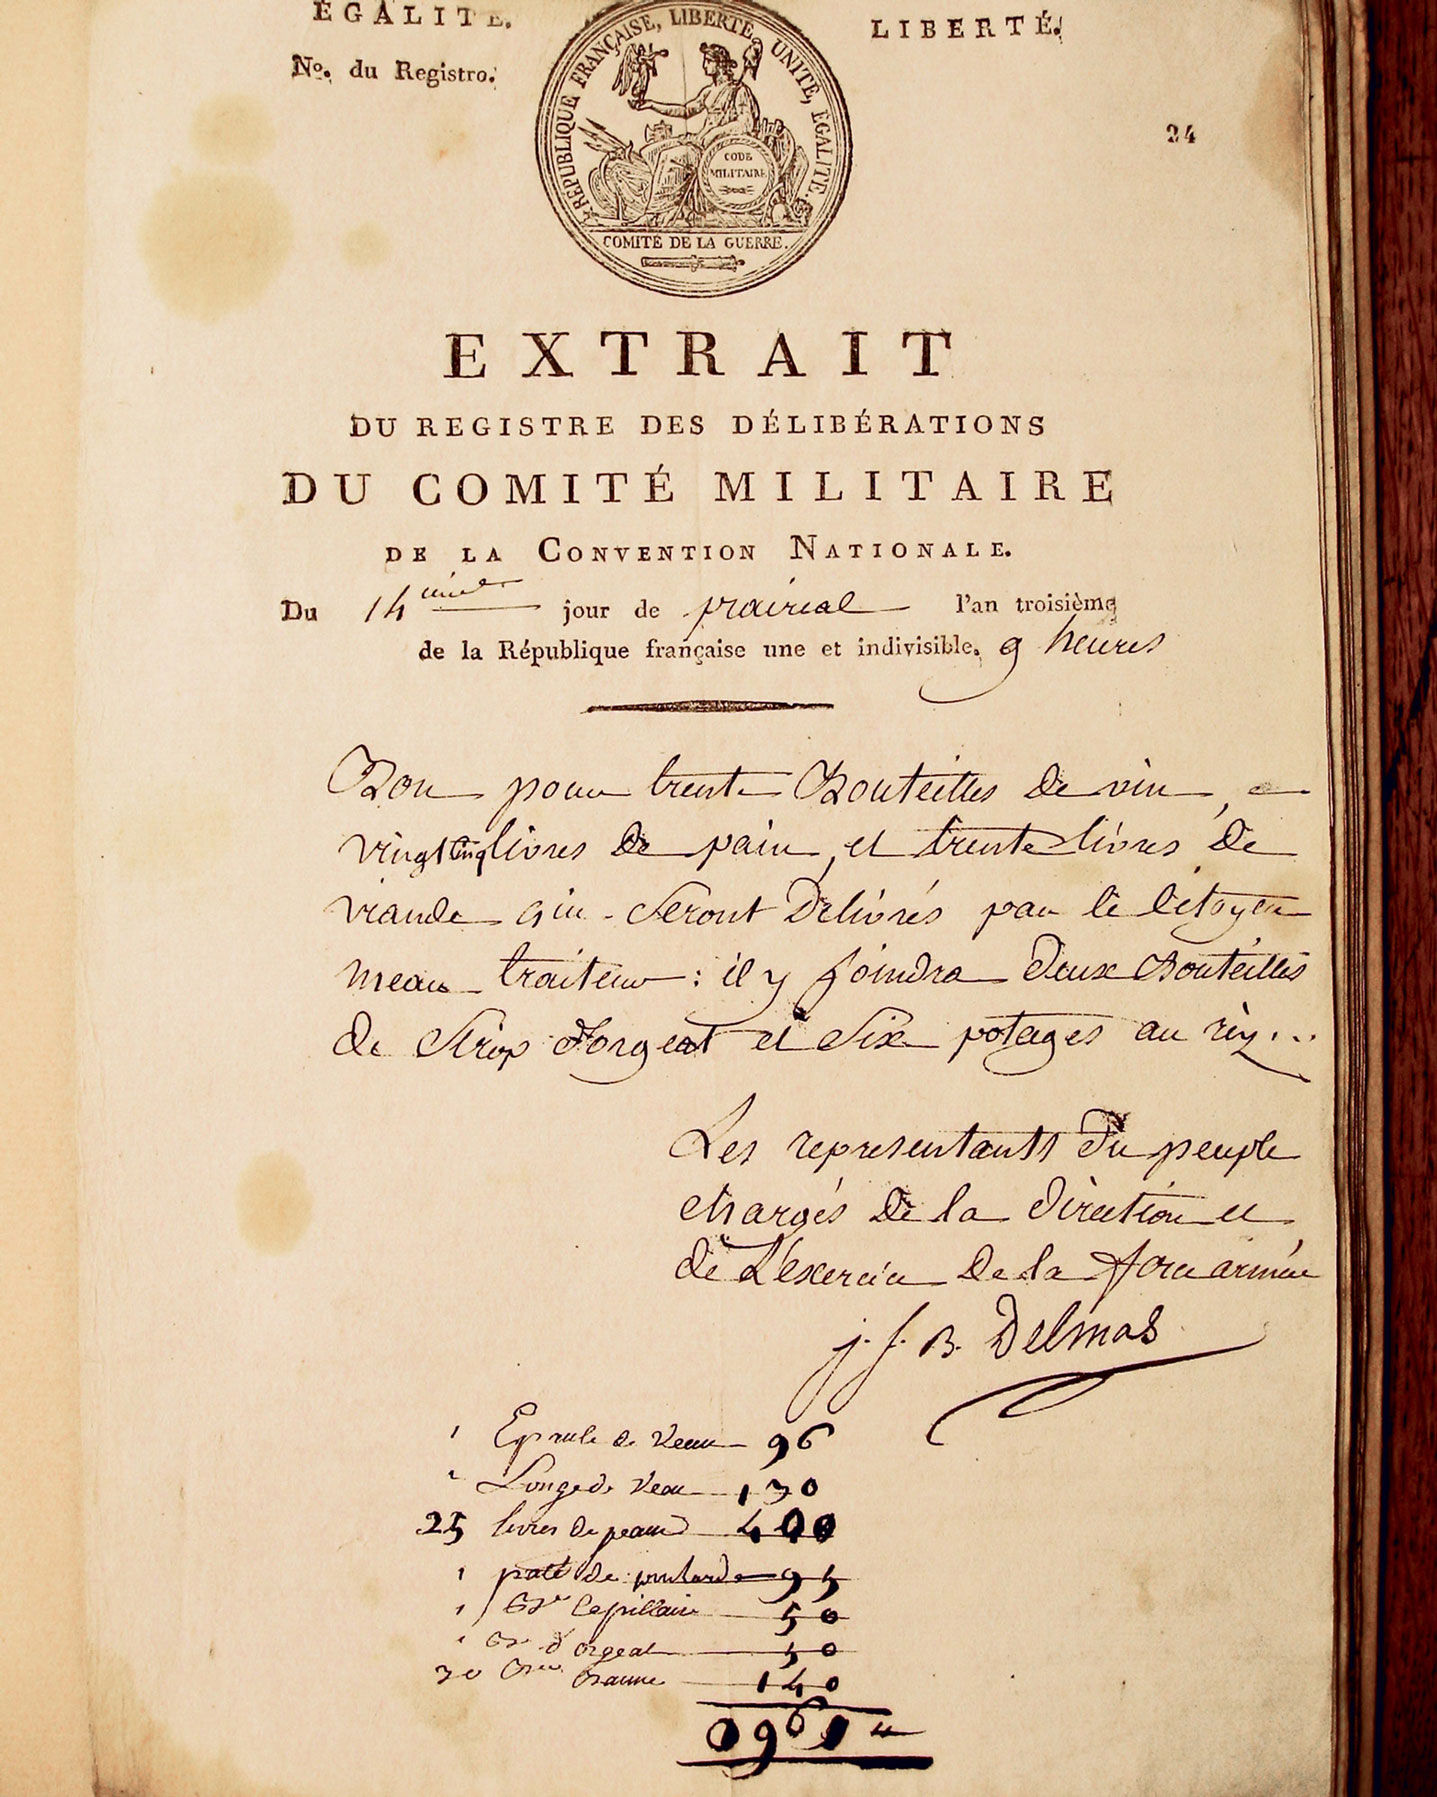 A photograph of an order for food signed by Jean-François-Bertrand Delmas. Beneath the order is the caterer’s tally of the cost of each item ordered.